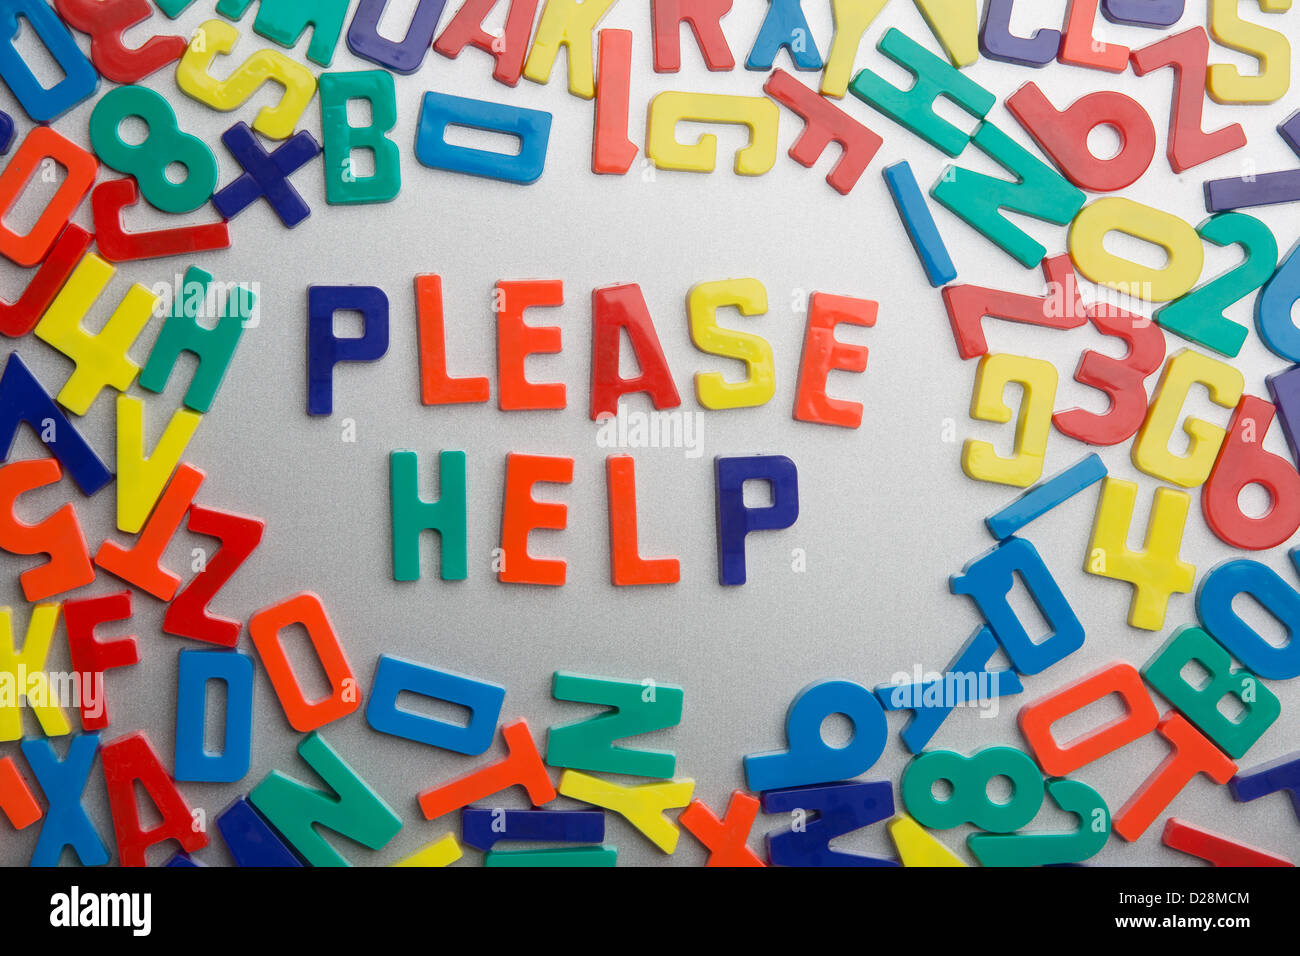 'Please Help' - Refrigerator magnets spell messages out of a jumble of letters Stock Photo